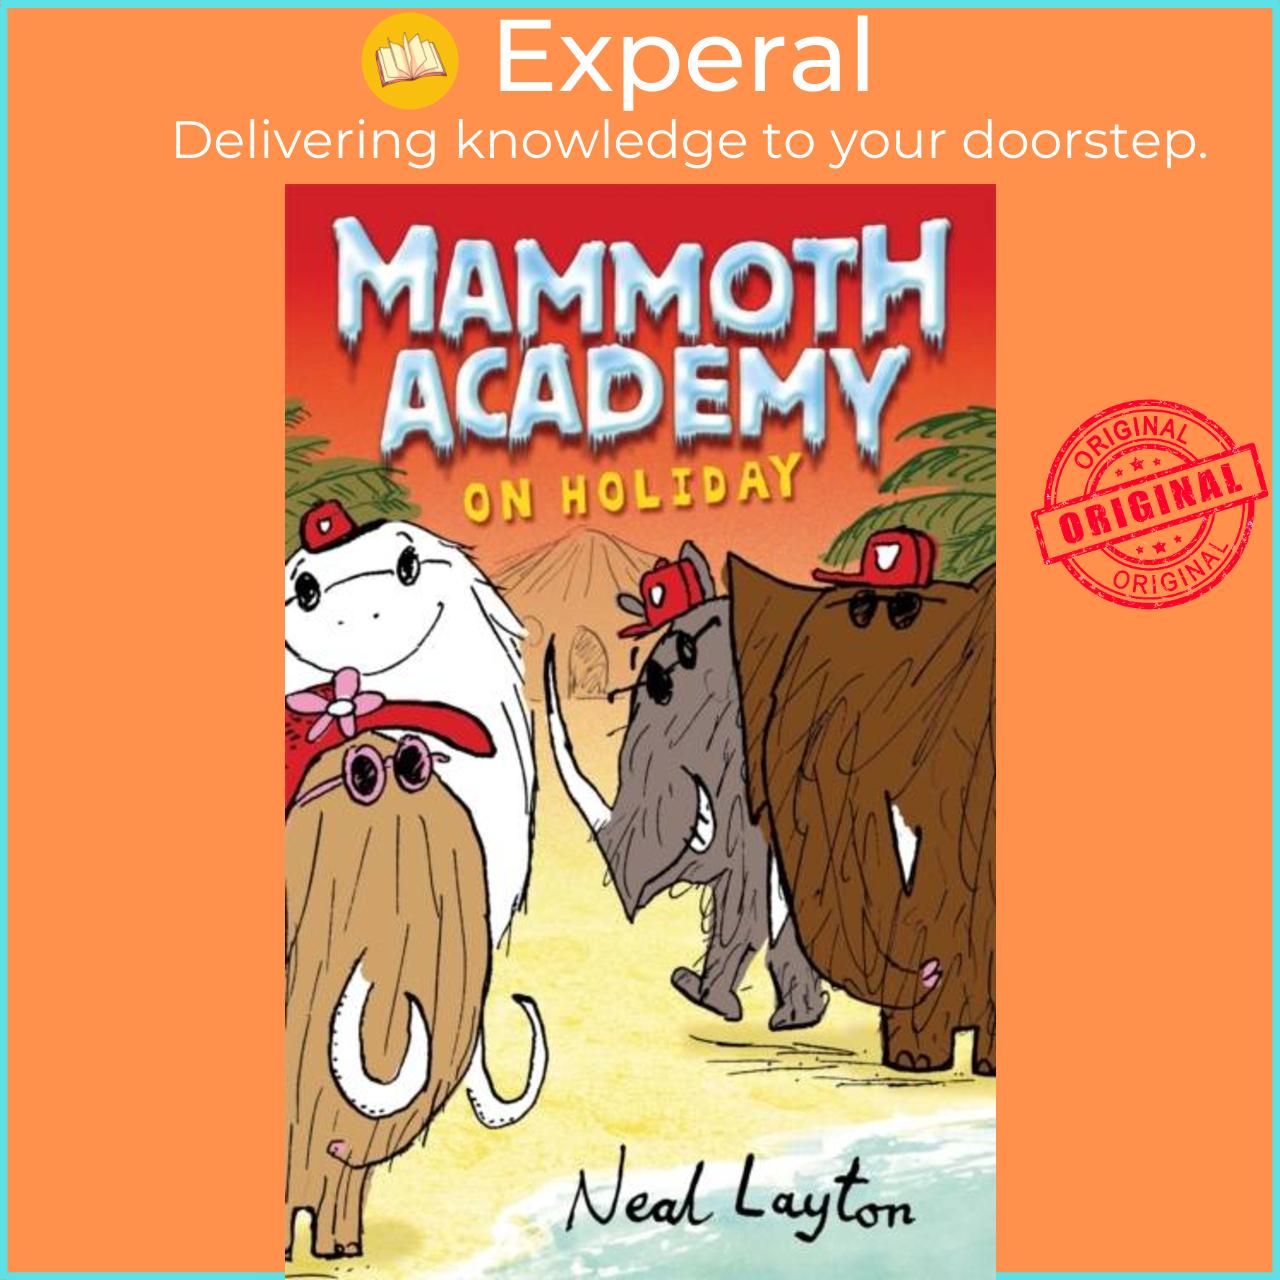 Sách - Mammoth Academy: Mammoth Academy On Holiday by Neal Layton (UK edition, paperback)